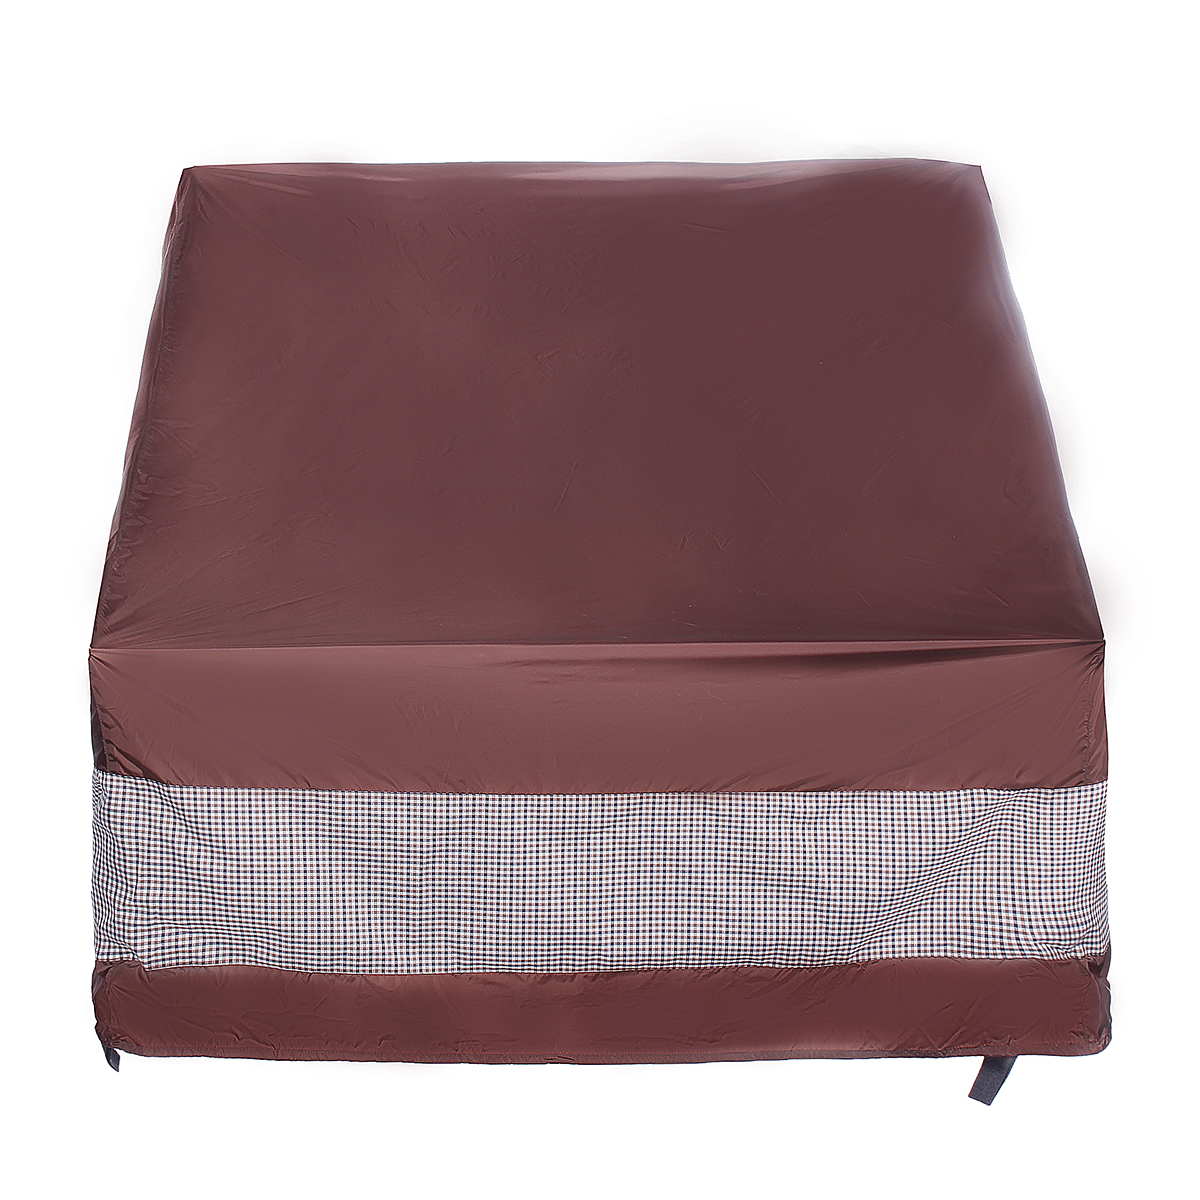 Outdoor-Patio-Furniture-Cover-Waterproof-Case-Dust-proof-Furniture-Chair-Sofa-Covers-Garden-UV-Sun-P-1780051-2